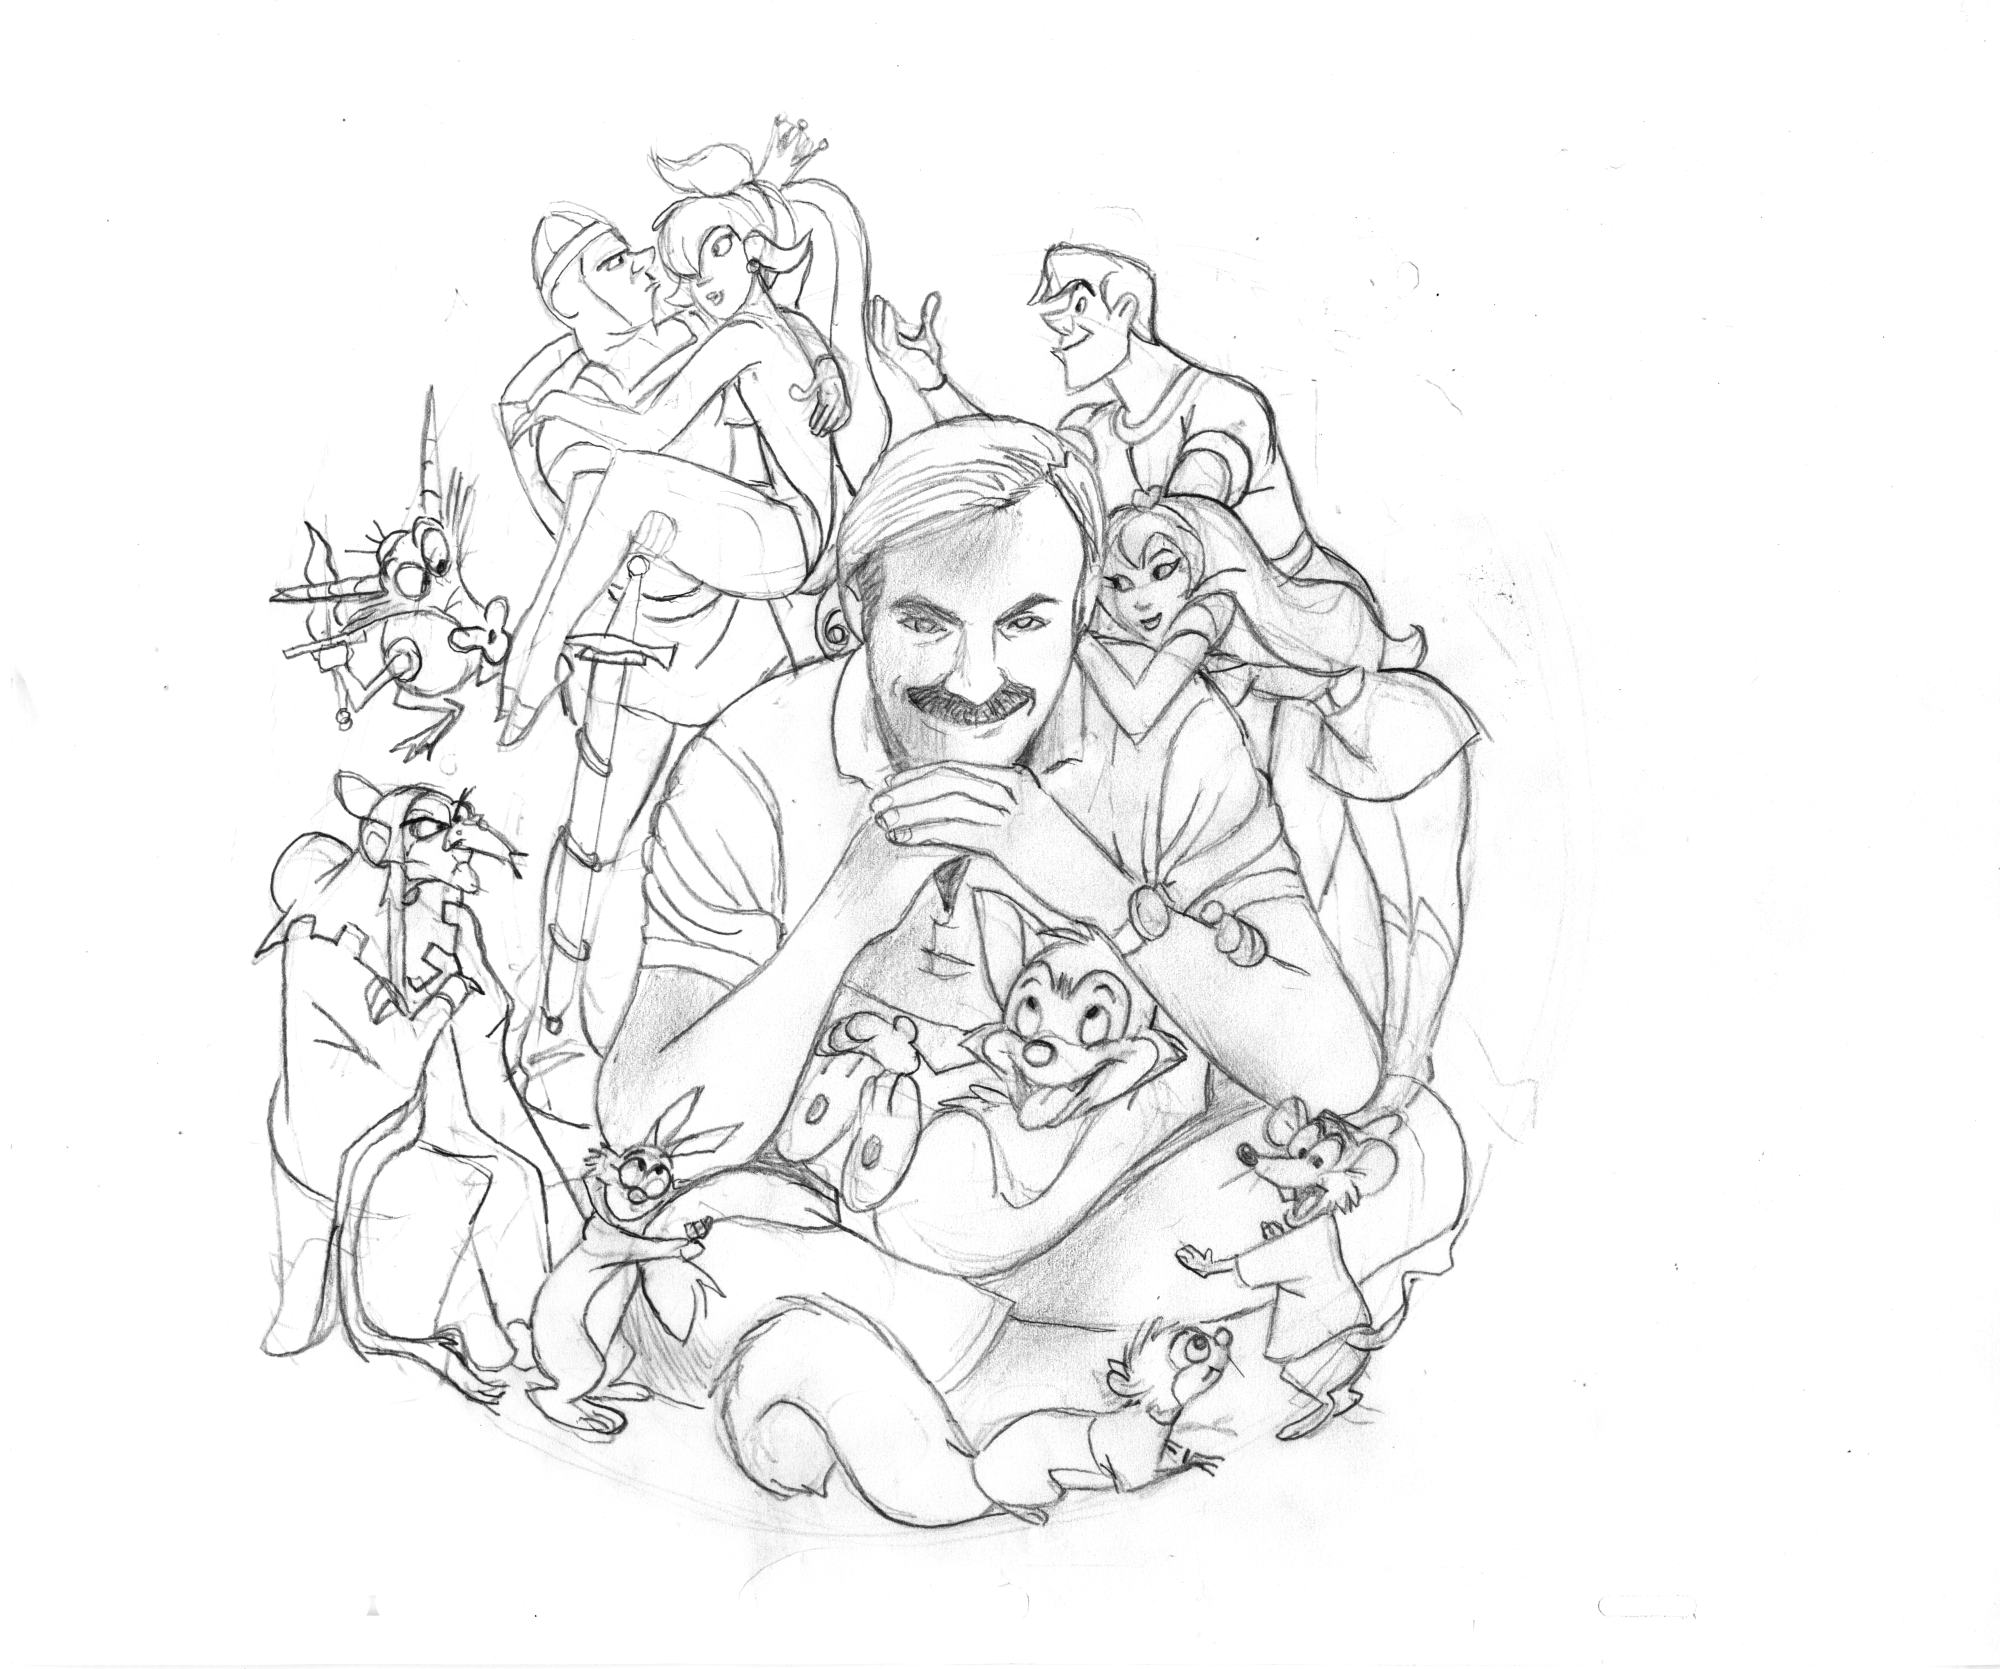 A self-portrait of animator Don Bluth from the memoir "Somewhere Out There: An Animated Life."